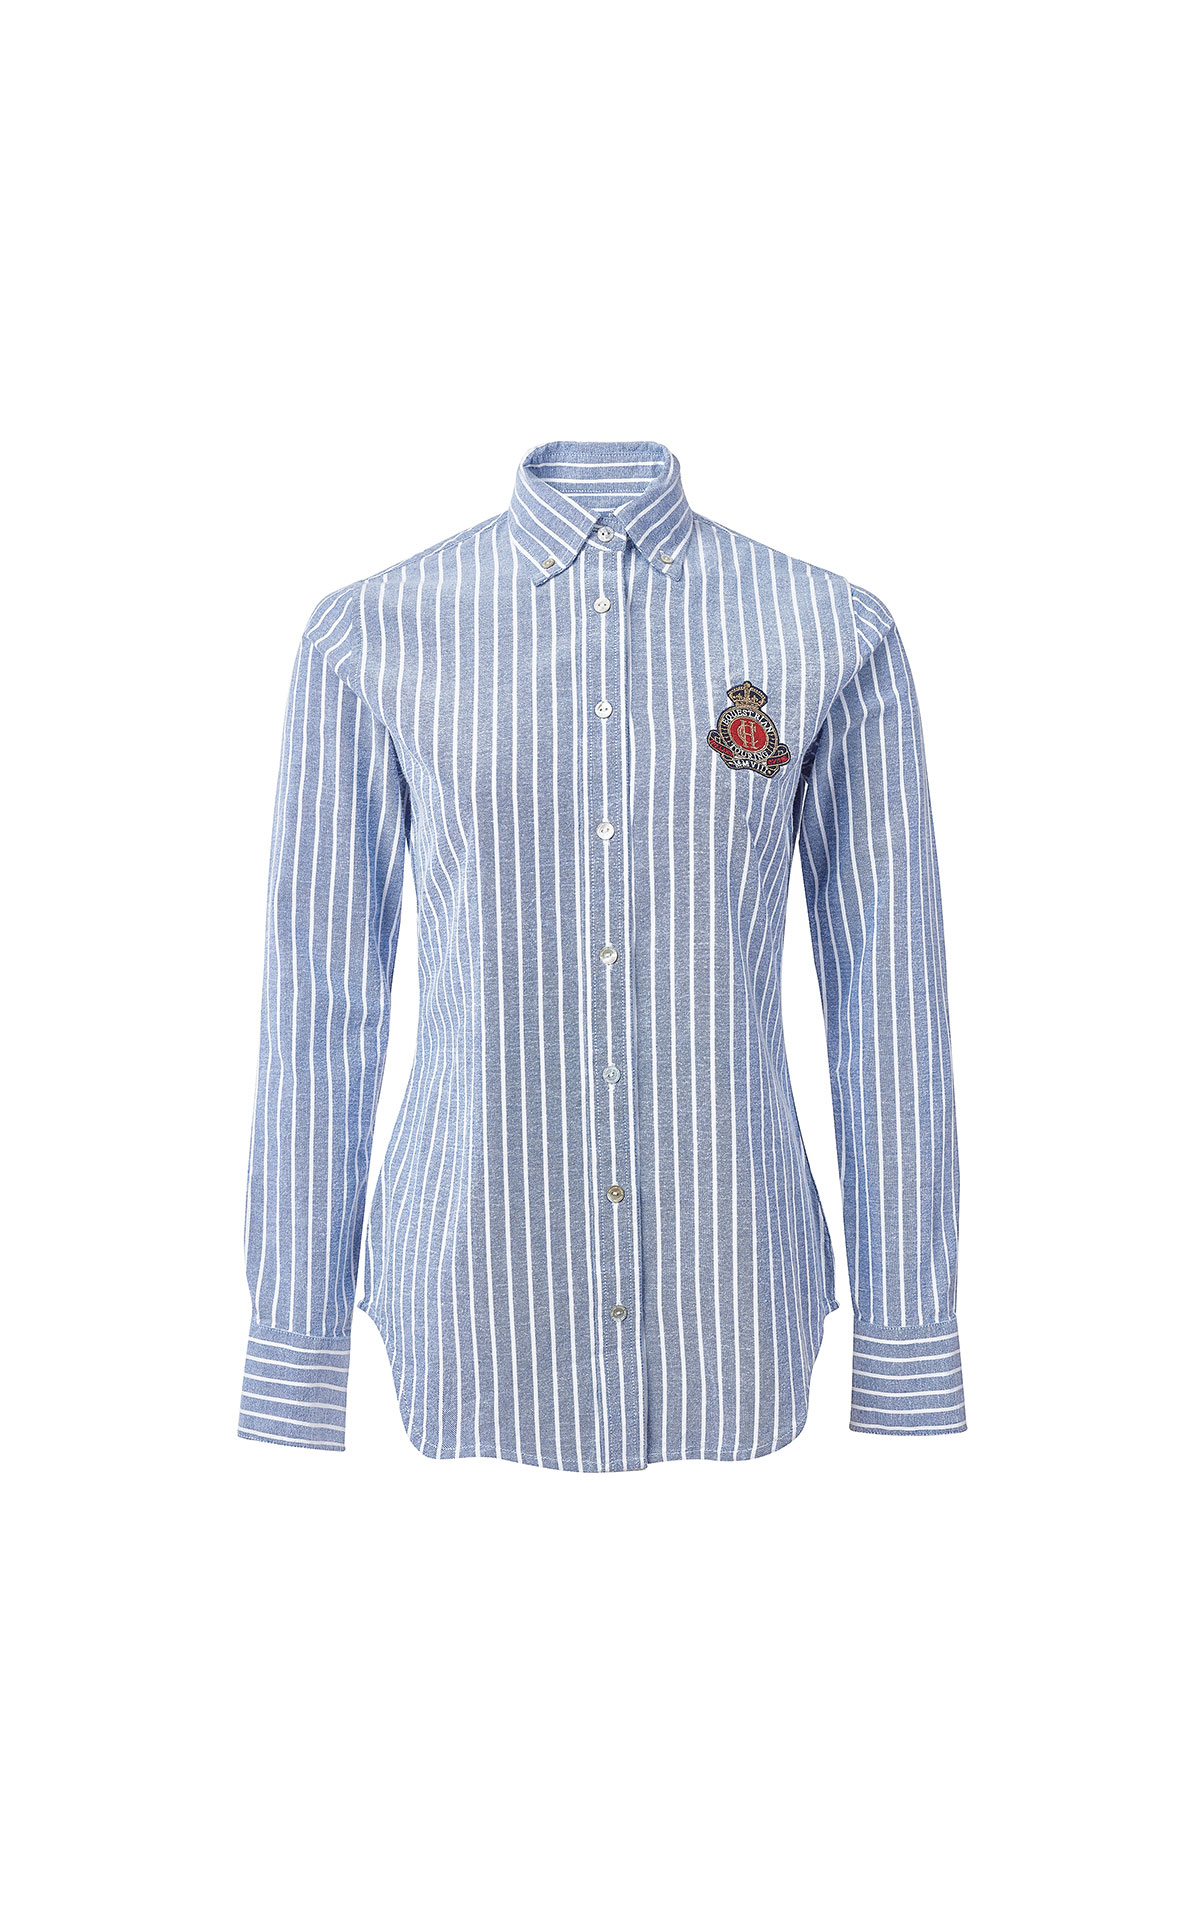 Holland Cooper Classic Oxford shirt tick stripe blue from Bicester Village